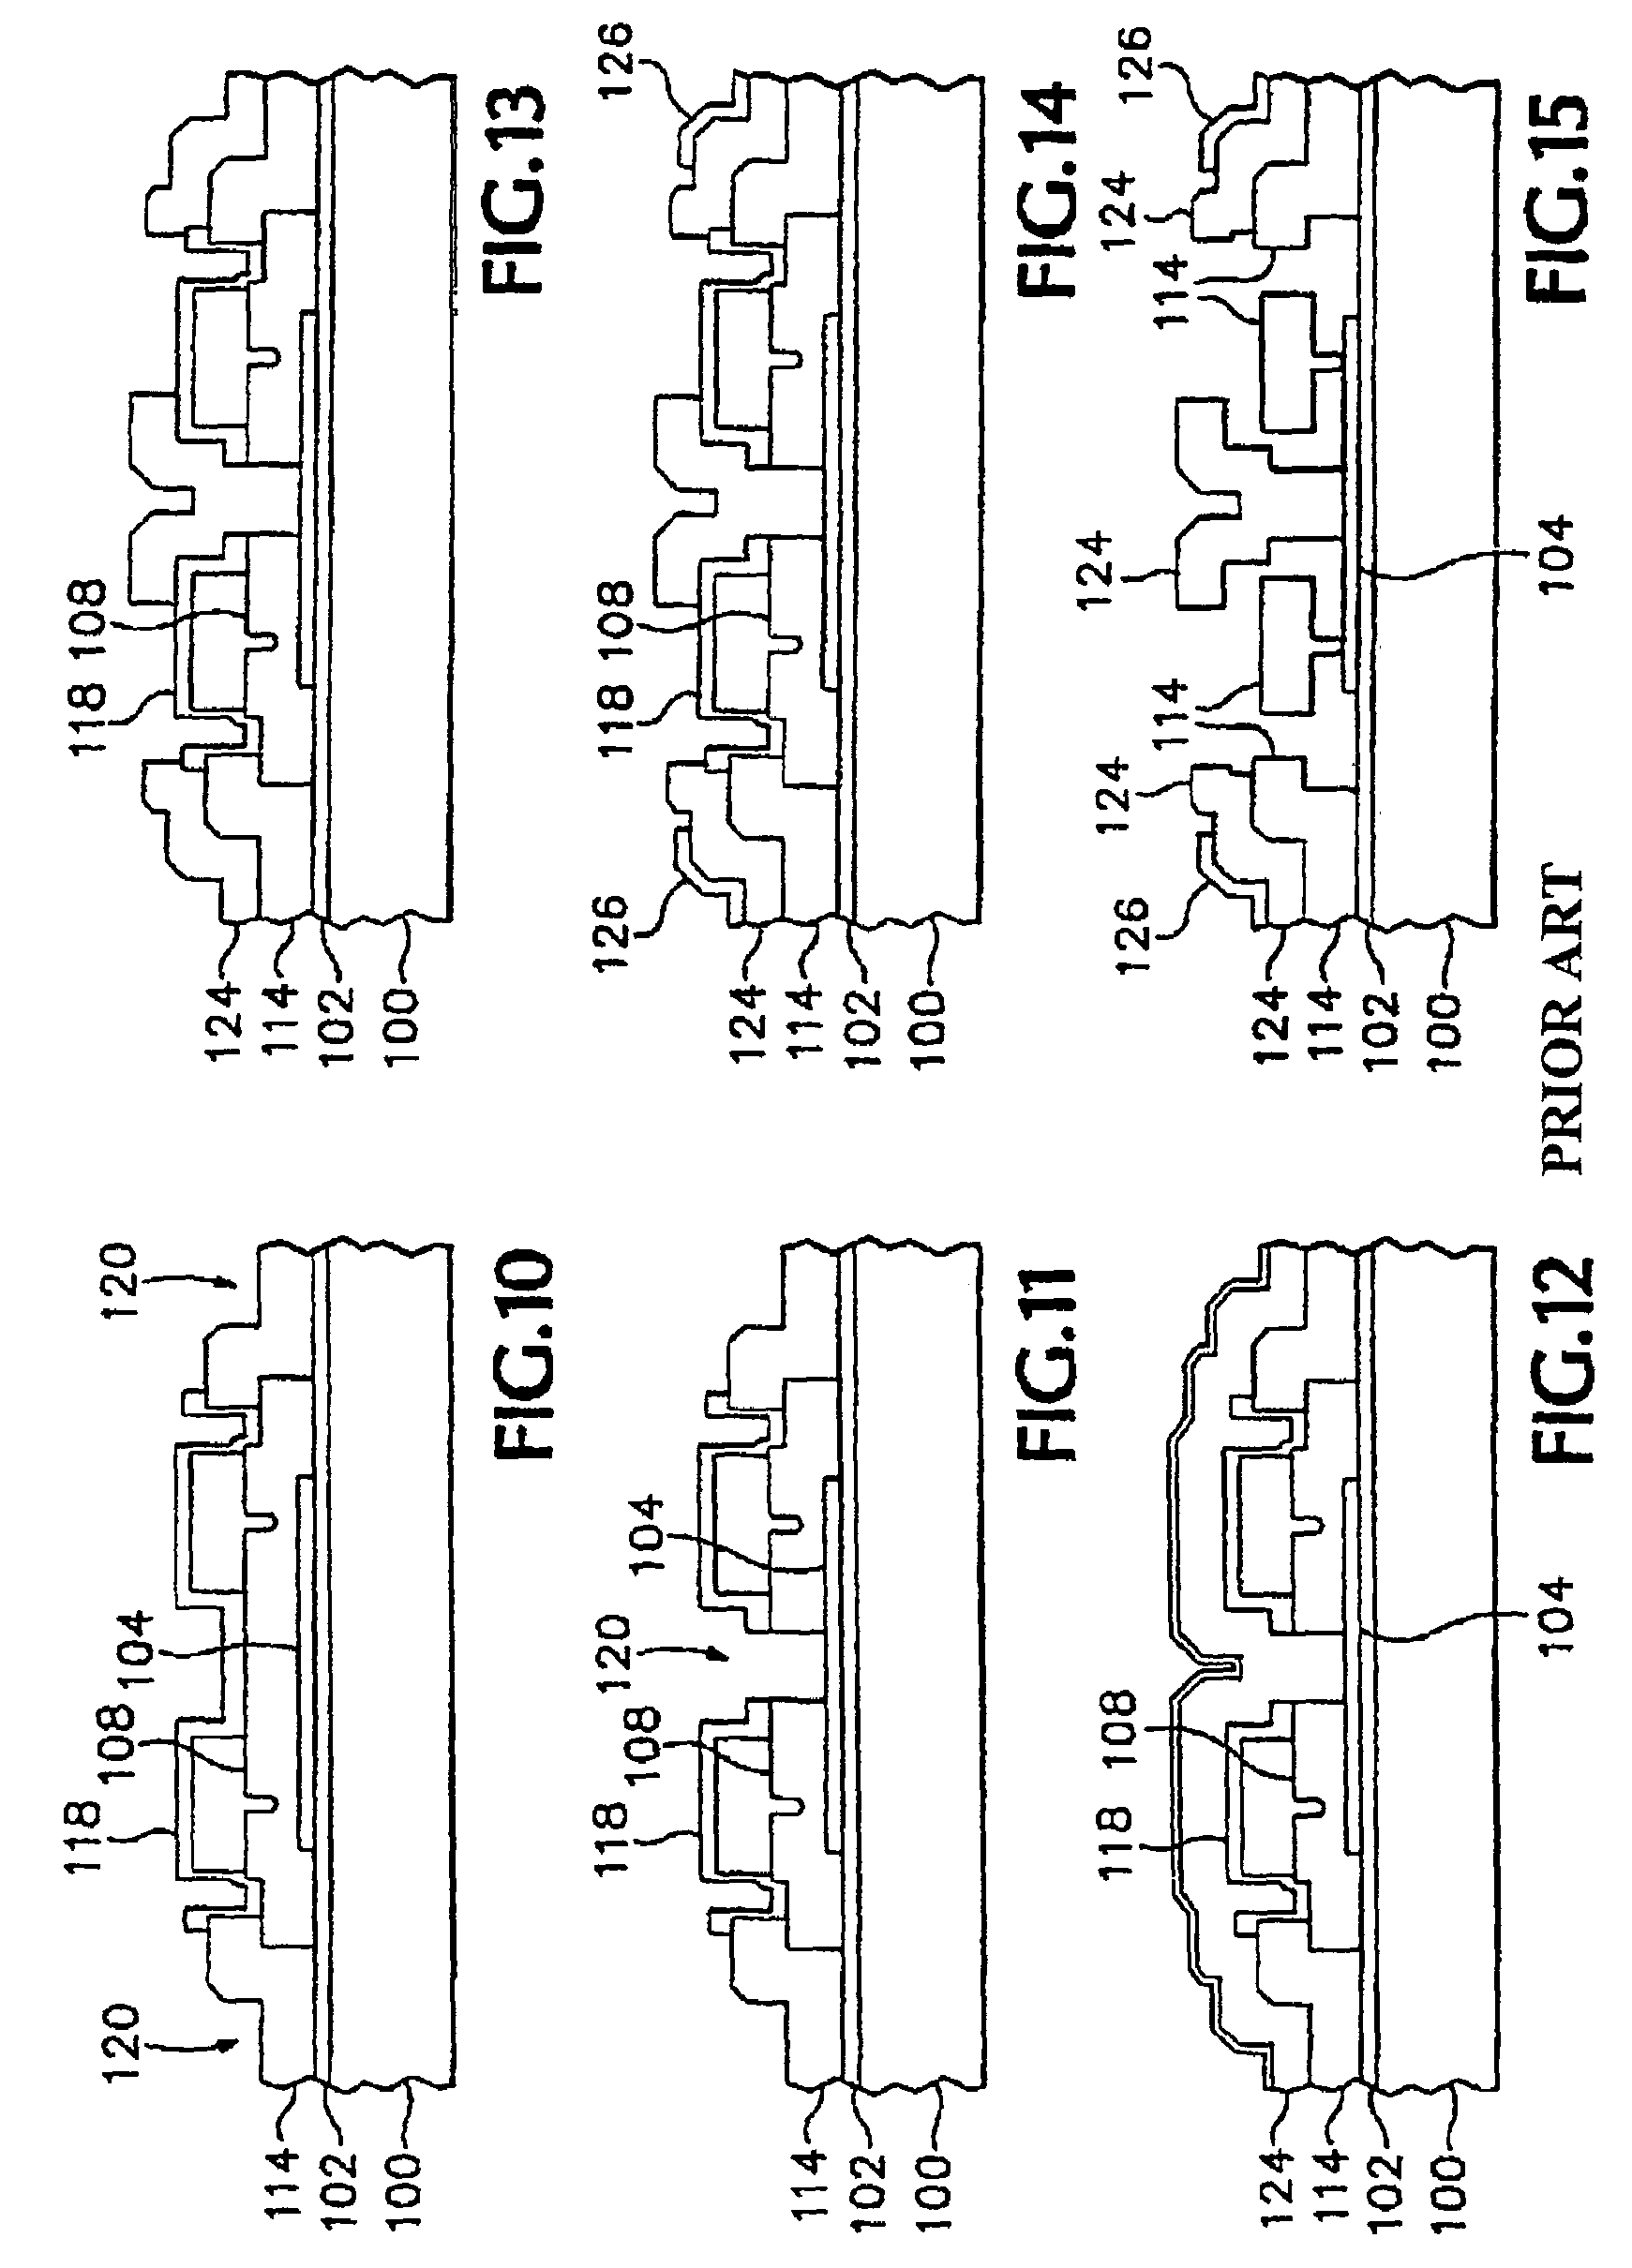 Magnetically actuated microelectromechanical systems actuator